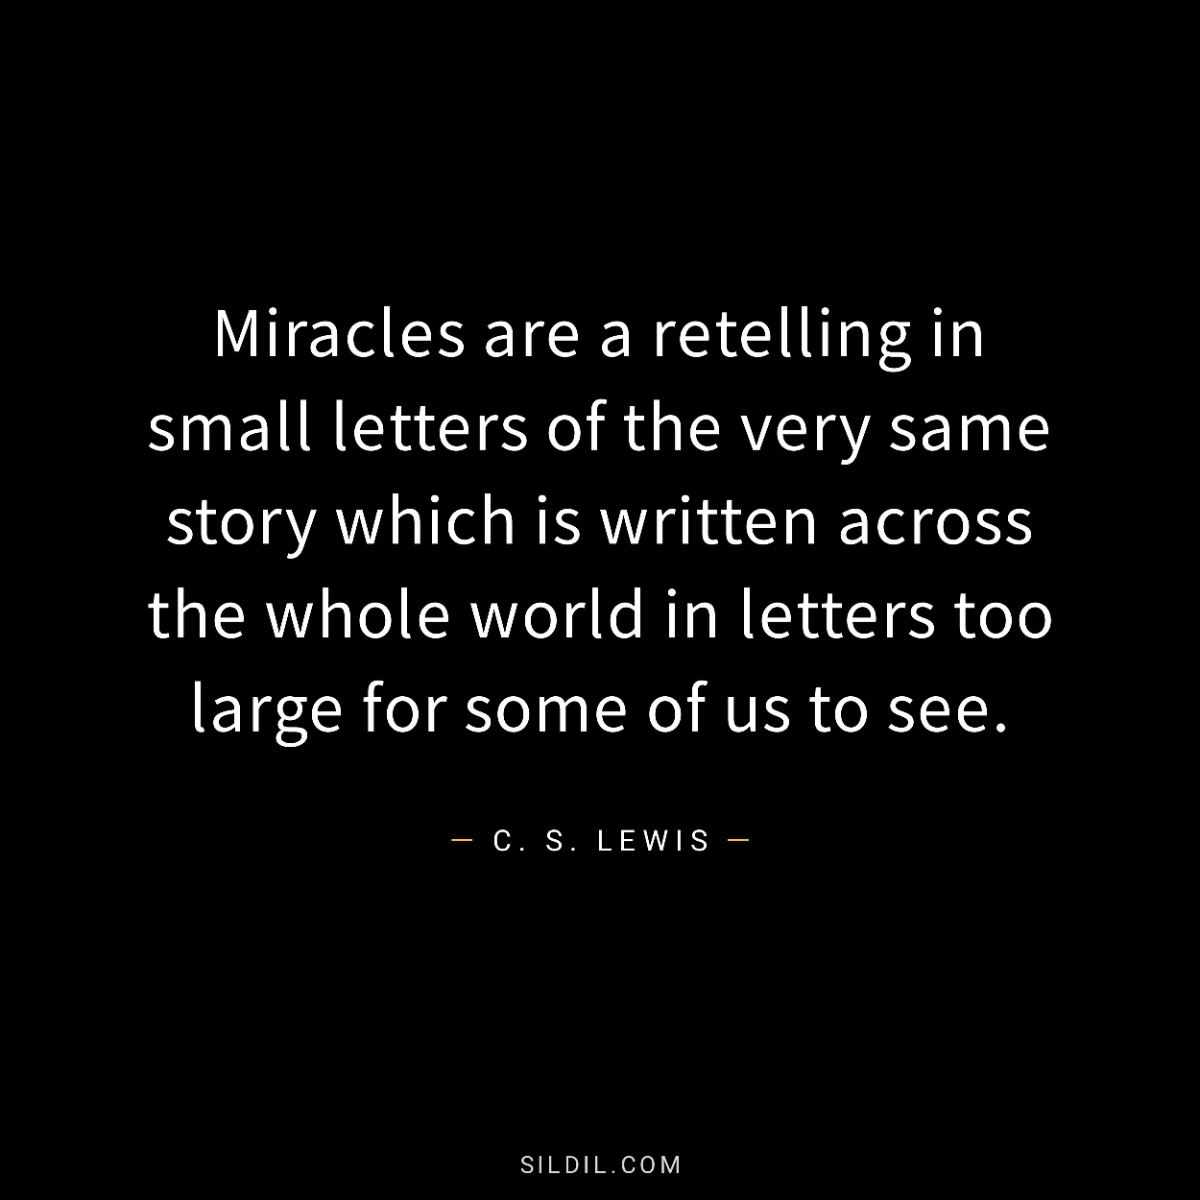 Miracles are a retelling in small letters of the very same story which is written across the whole world in letters too large for some of us to see.